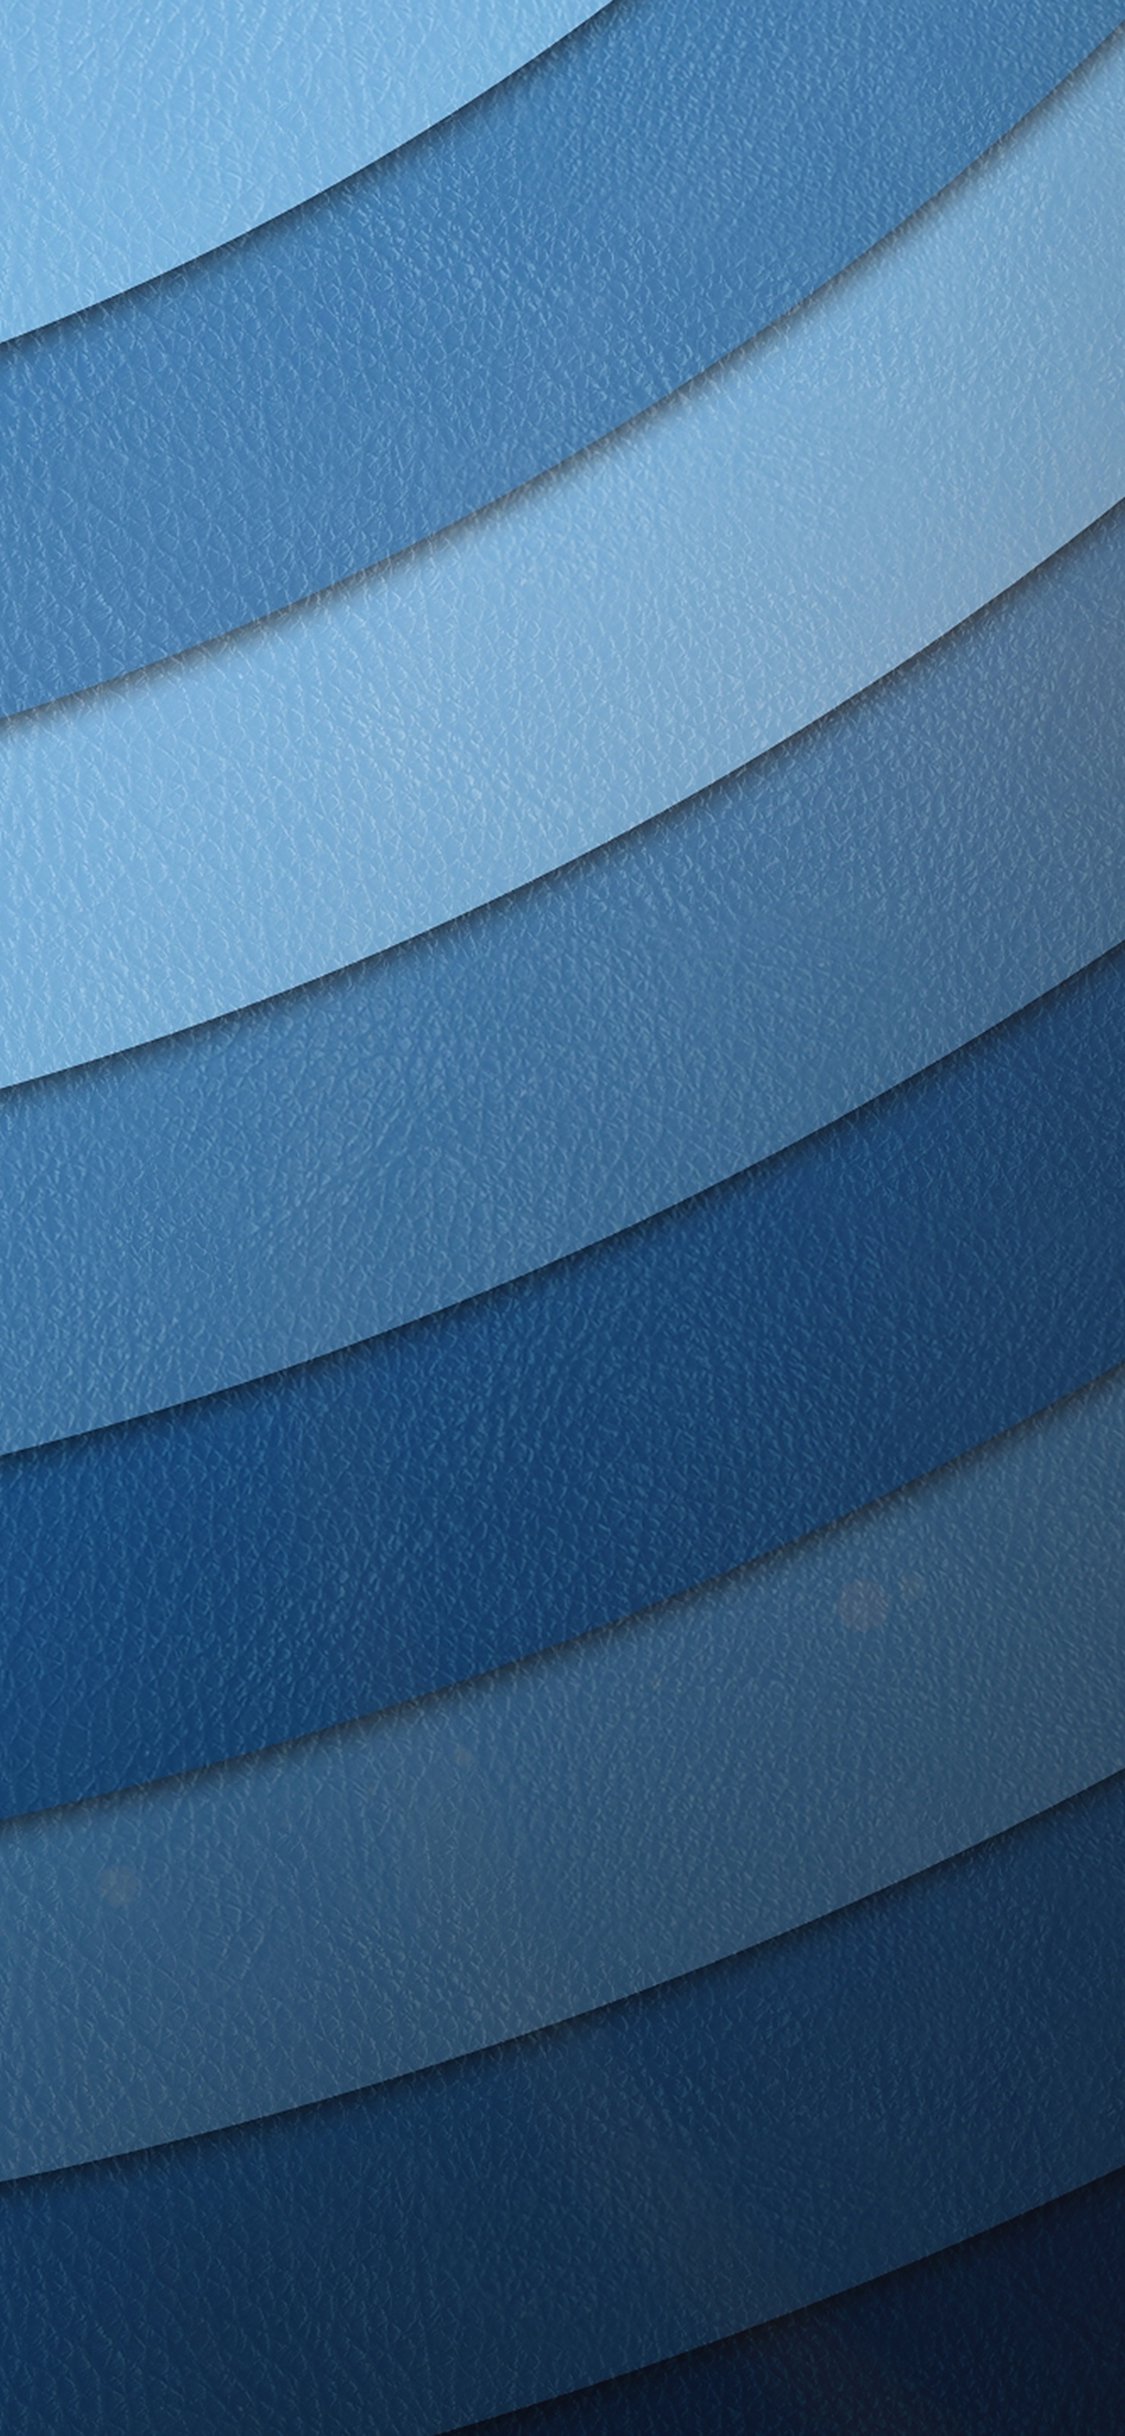 Texture Blue Graphic Iphone X Wallpaper - Iphone X Hd Wallpaper Material , HD Wallpaper & Backgrounds